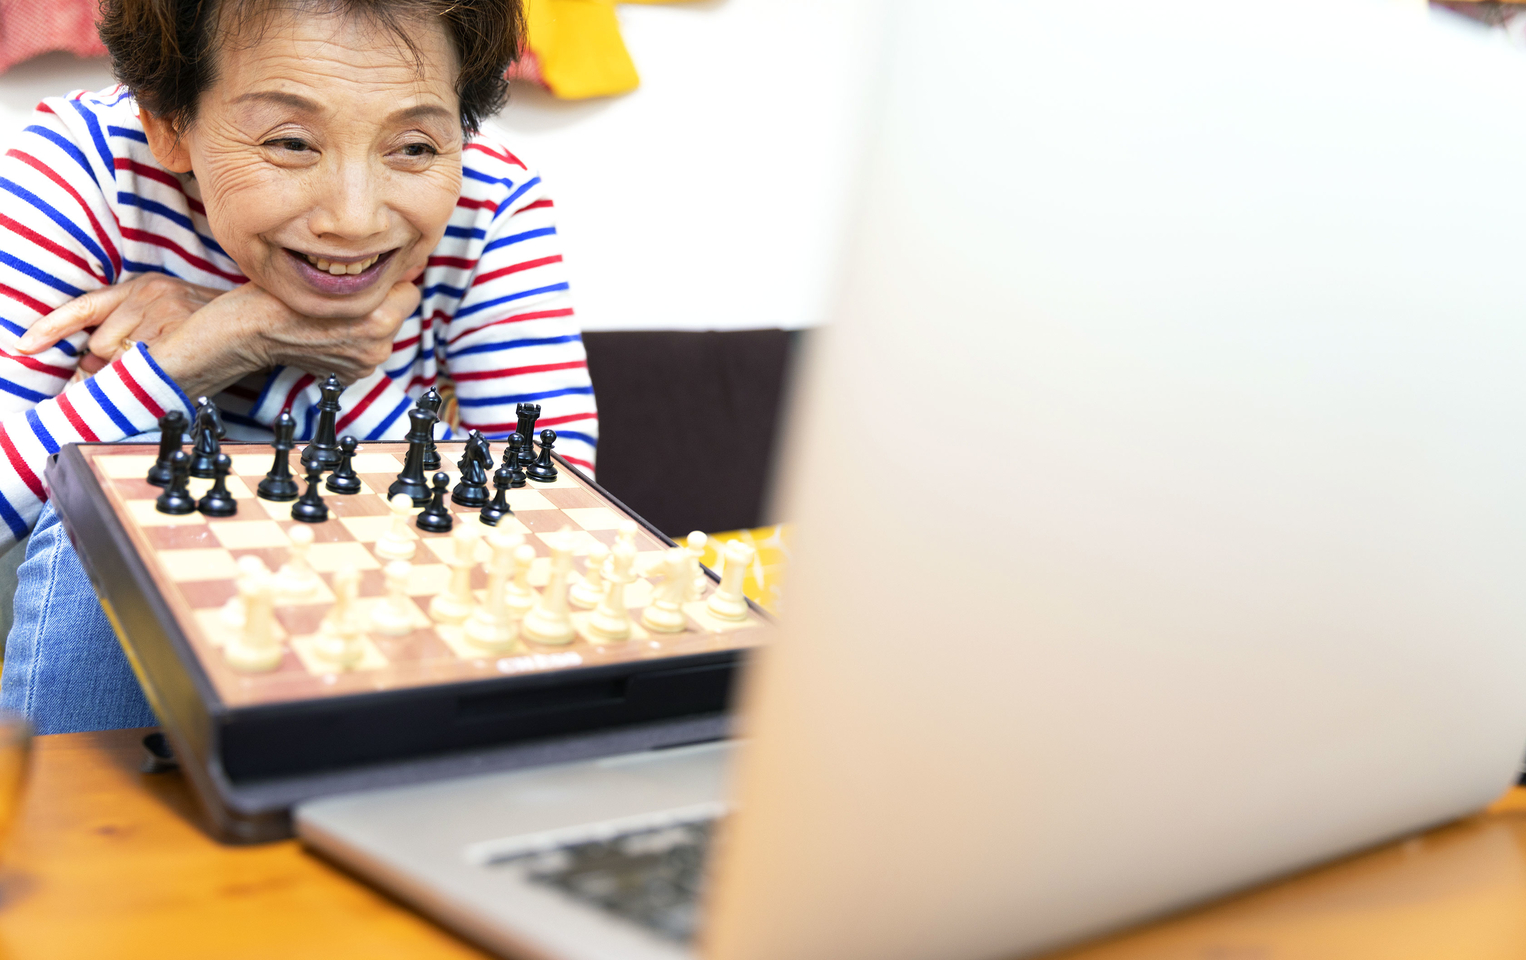 A woman in a blue, white and red shirt showing her chess board in front of a laptop